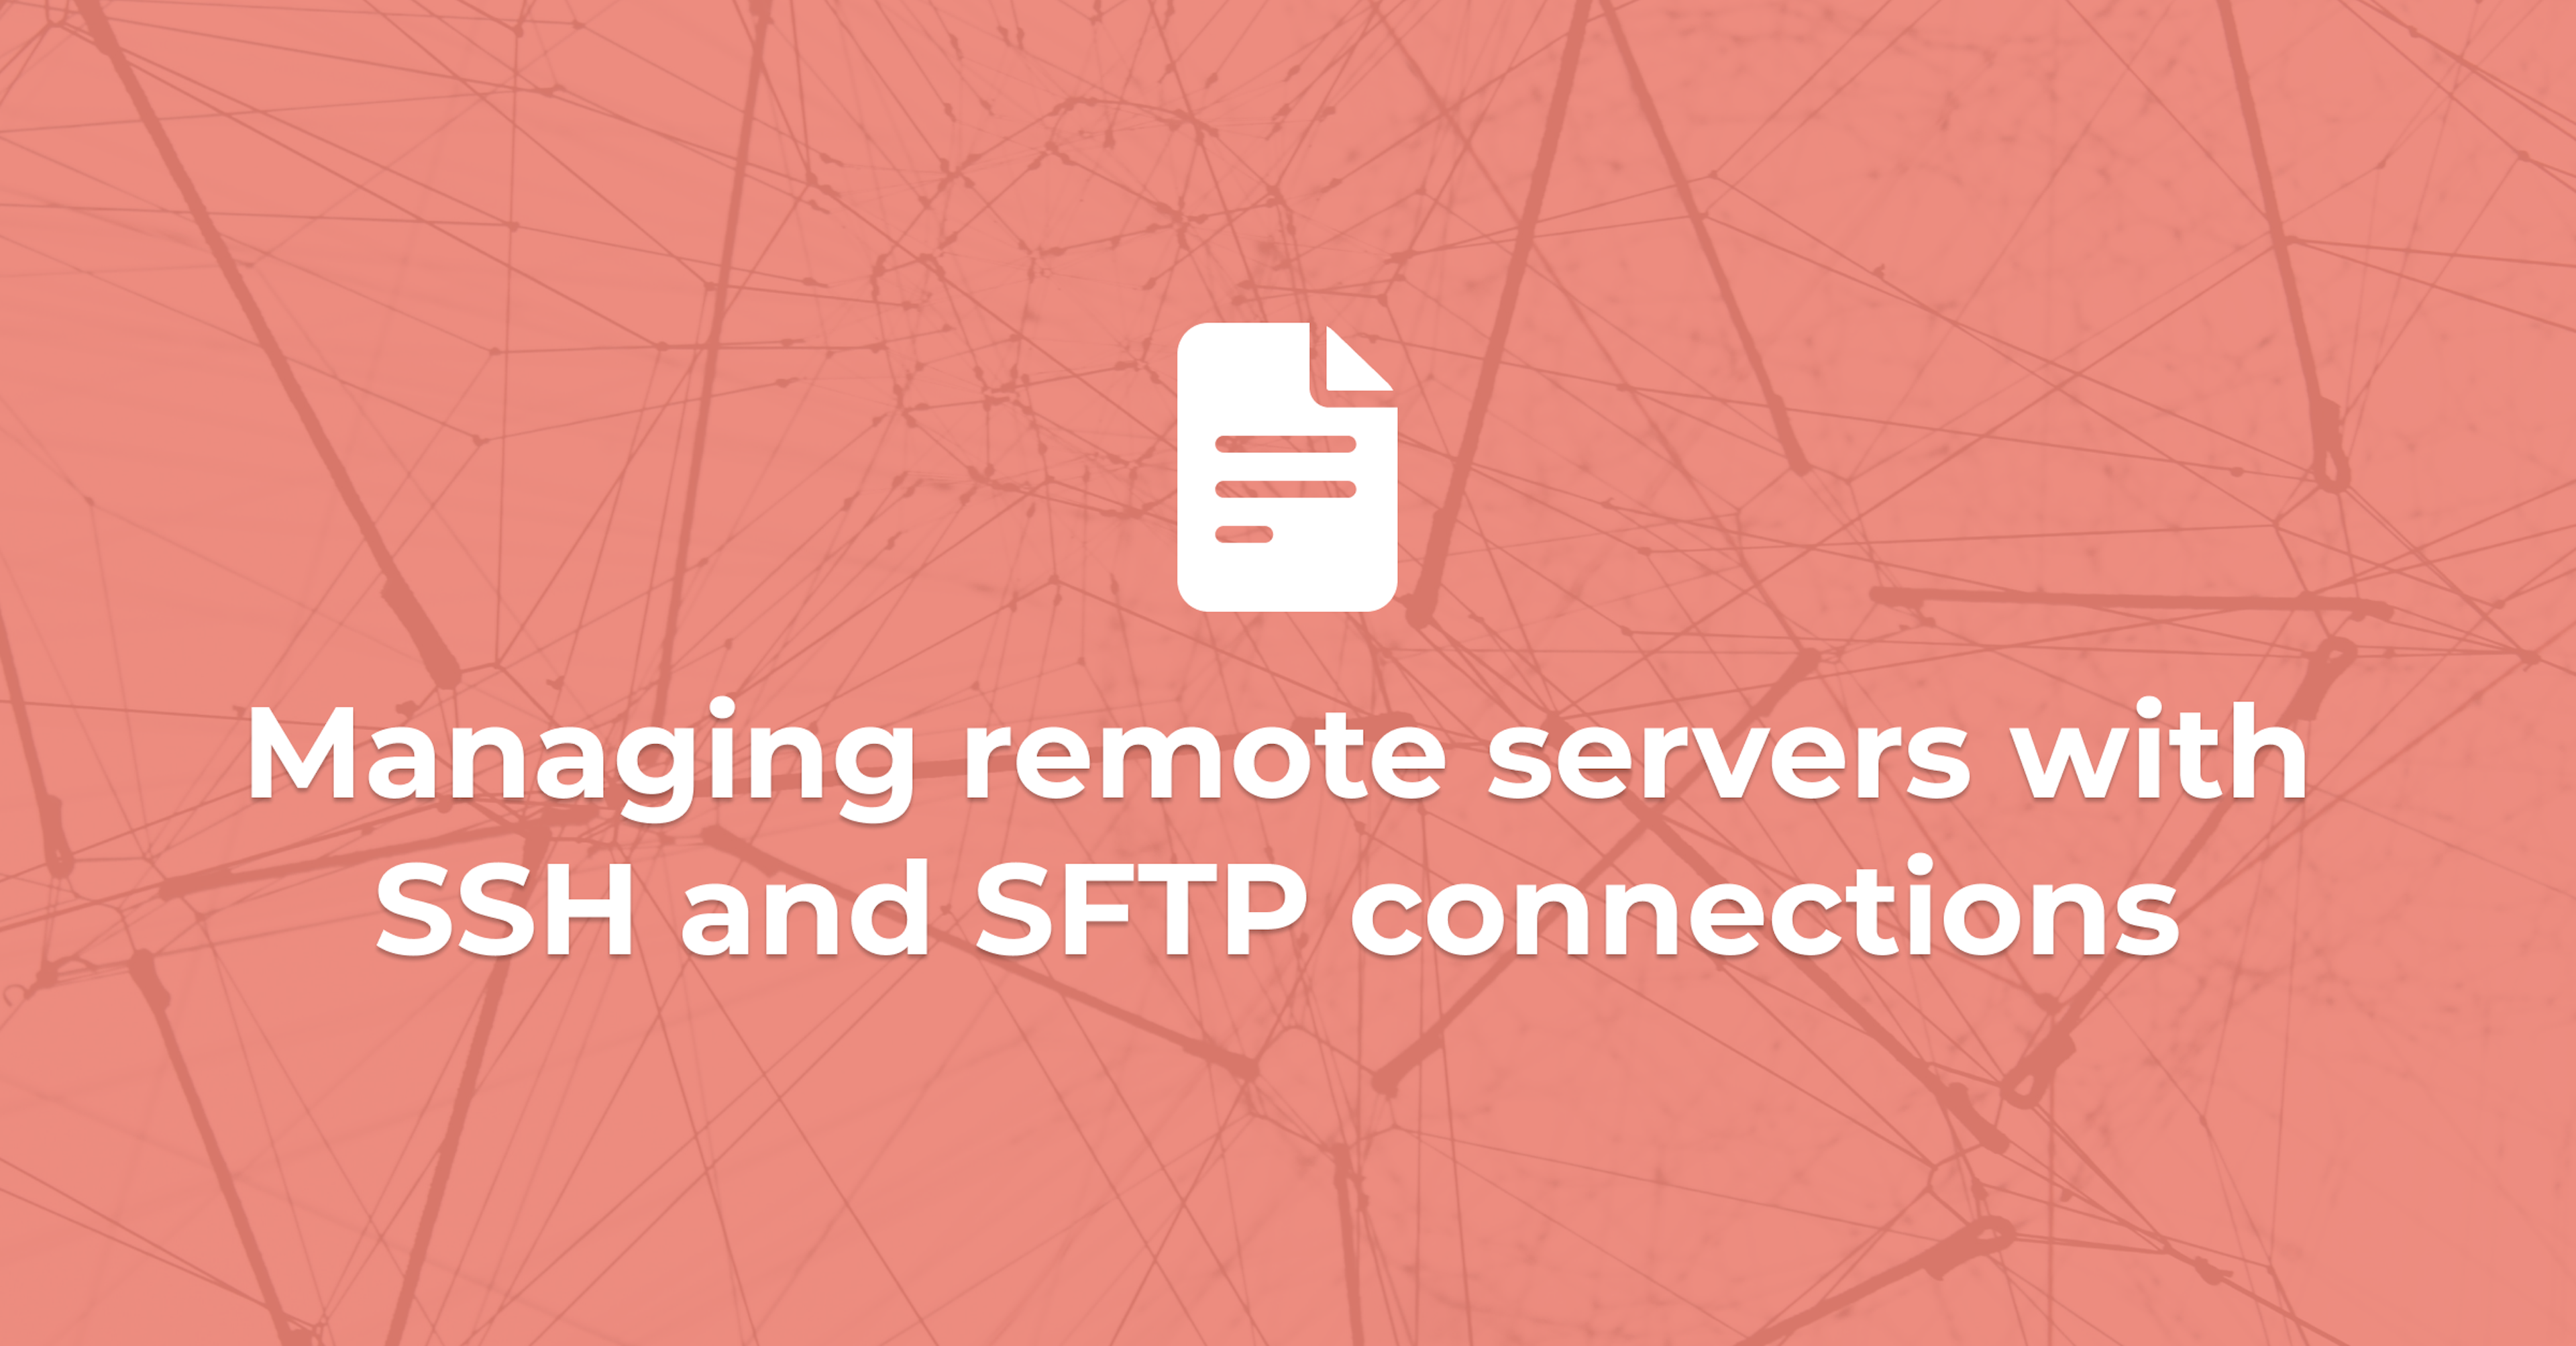 Managing remote servers with SSH and SFTP connections: a step-by-step guide